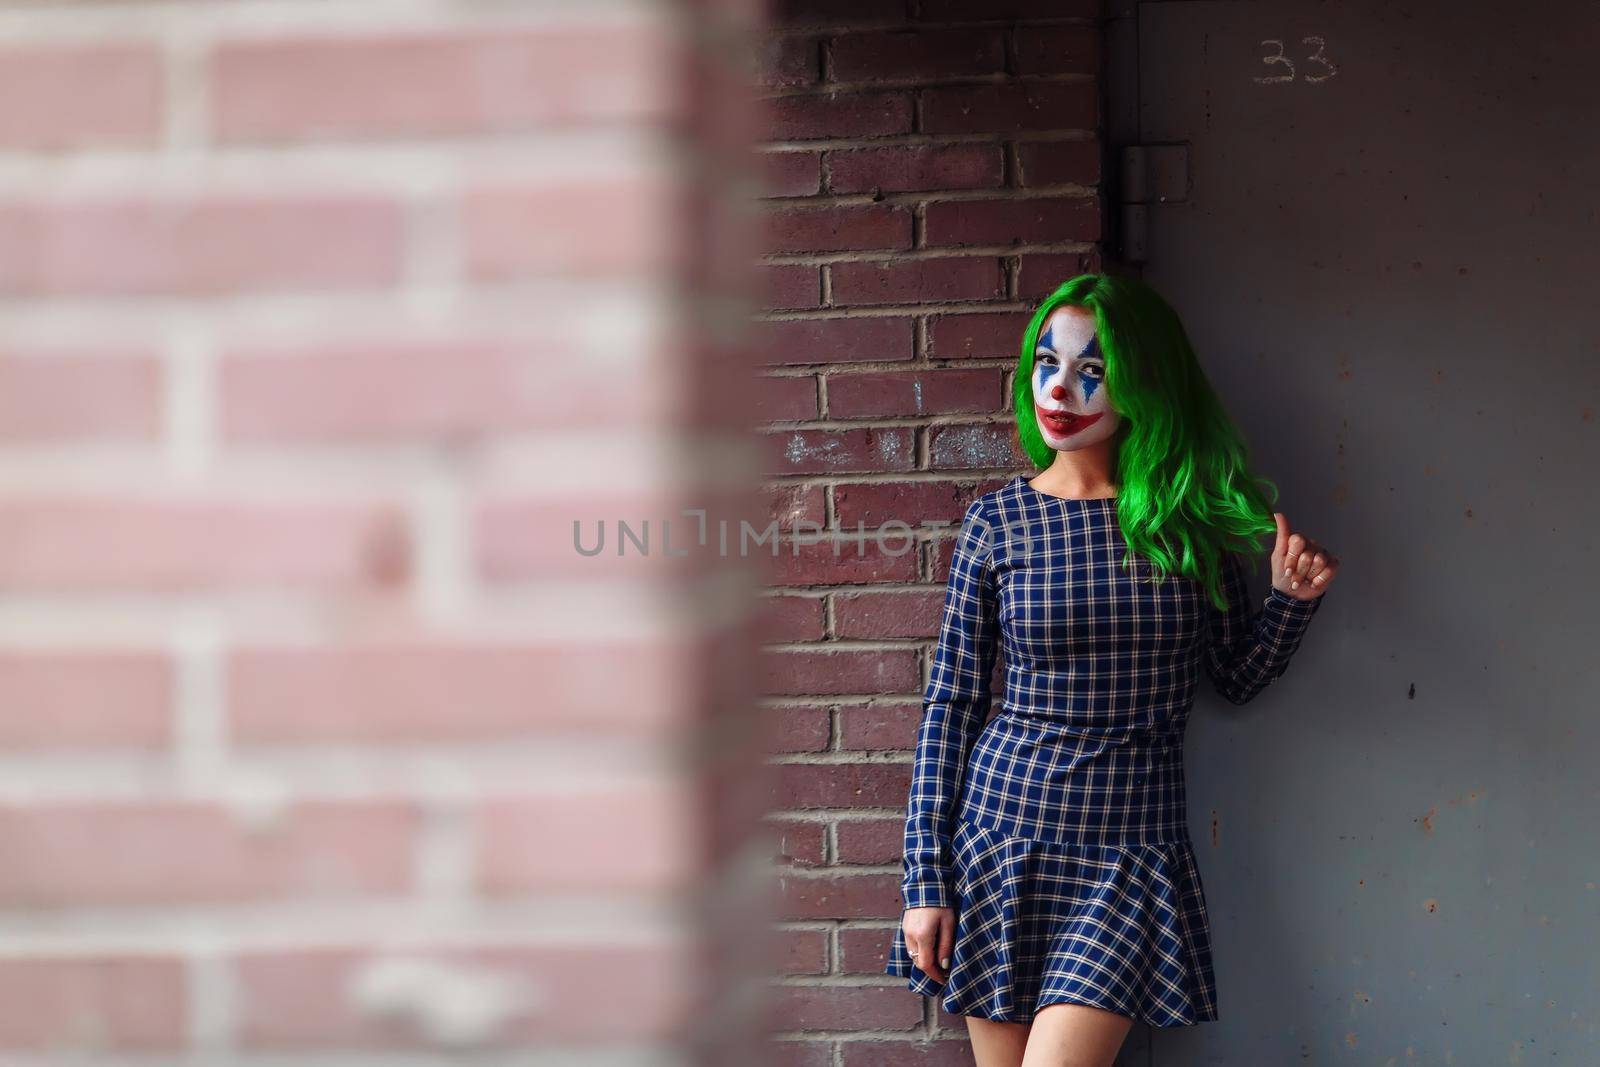 Portrait of a greenhaired woman in chekered dress with joker makeup on a brick wall blurred background.